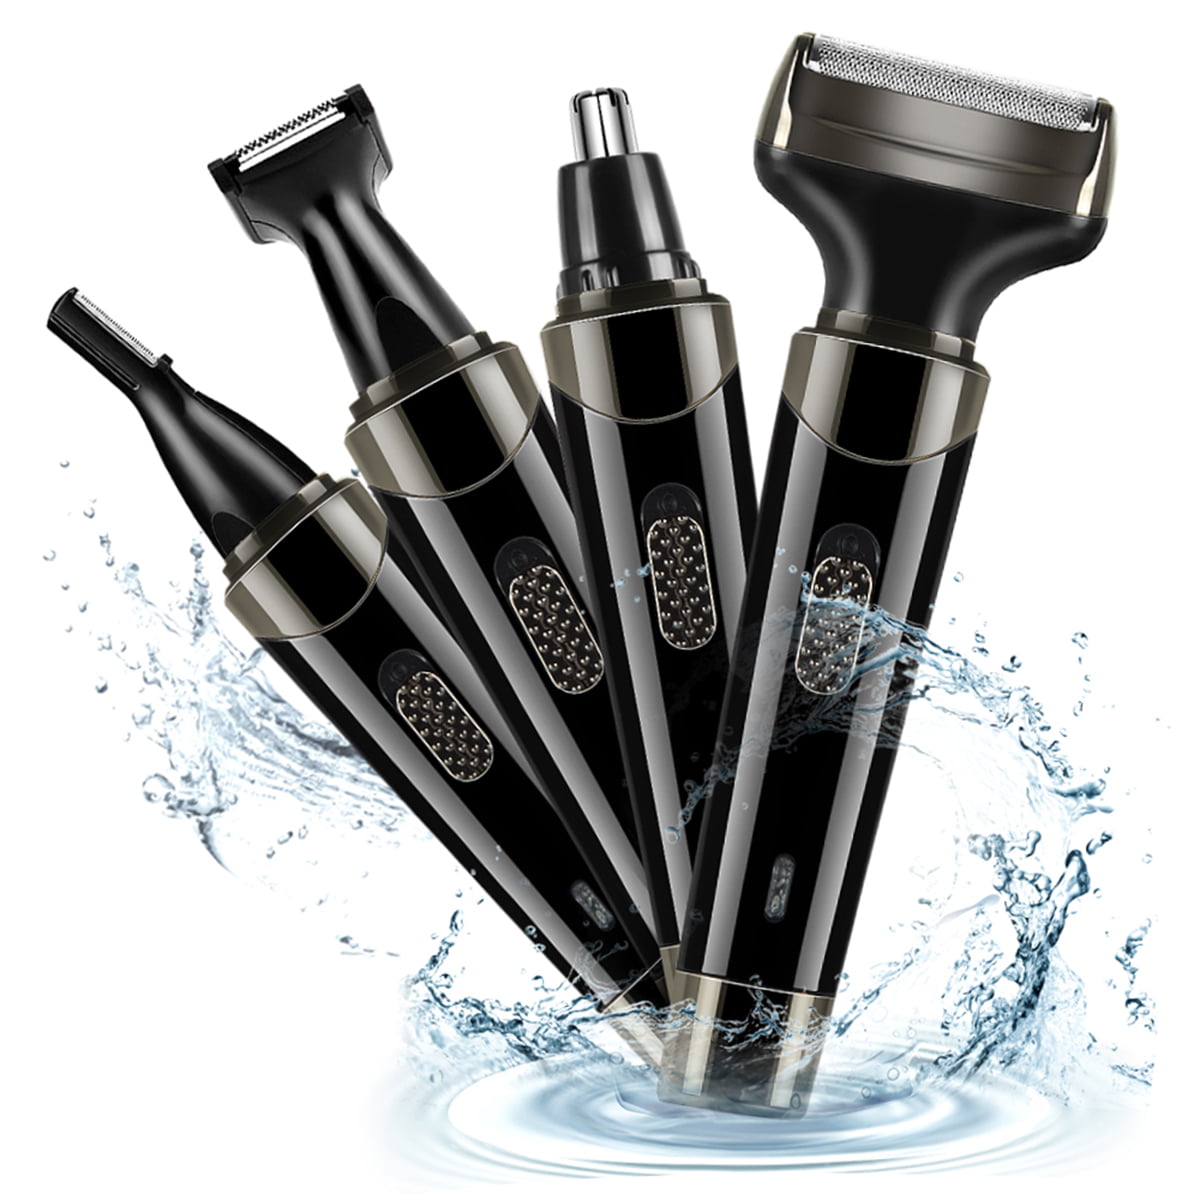 4-in-1 Waterproof Electric Shaver for Men and Women